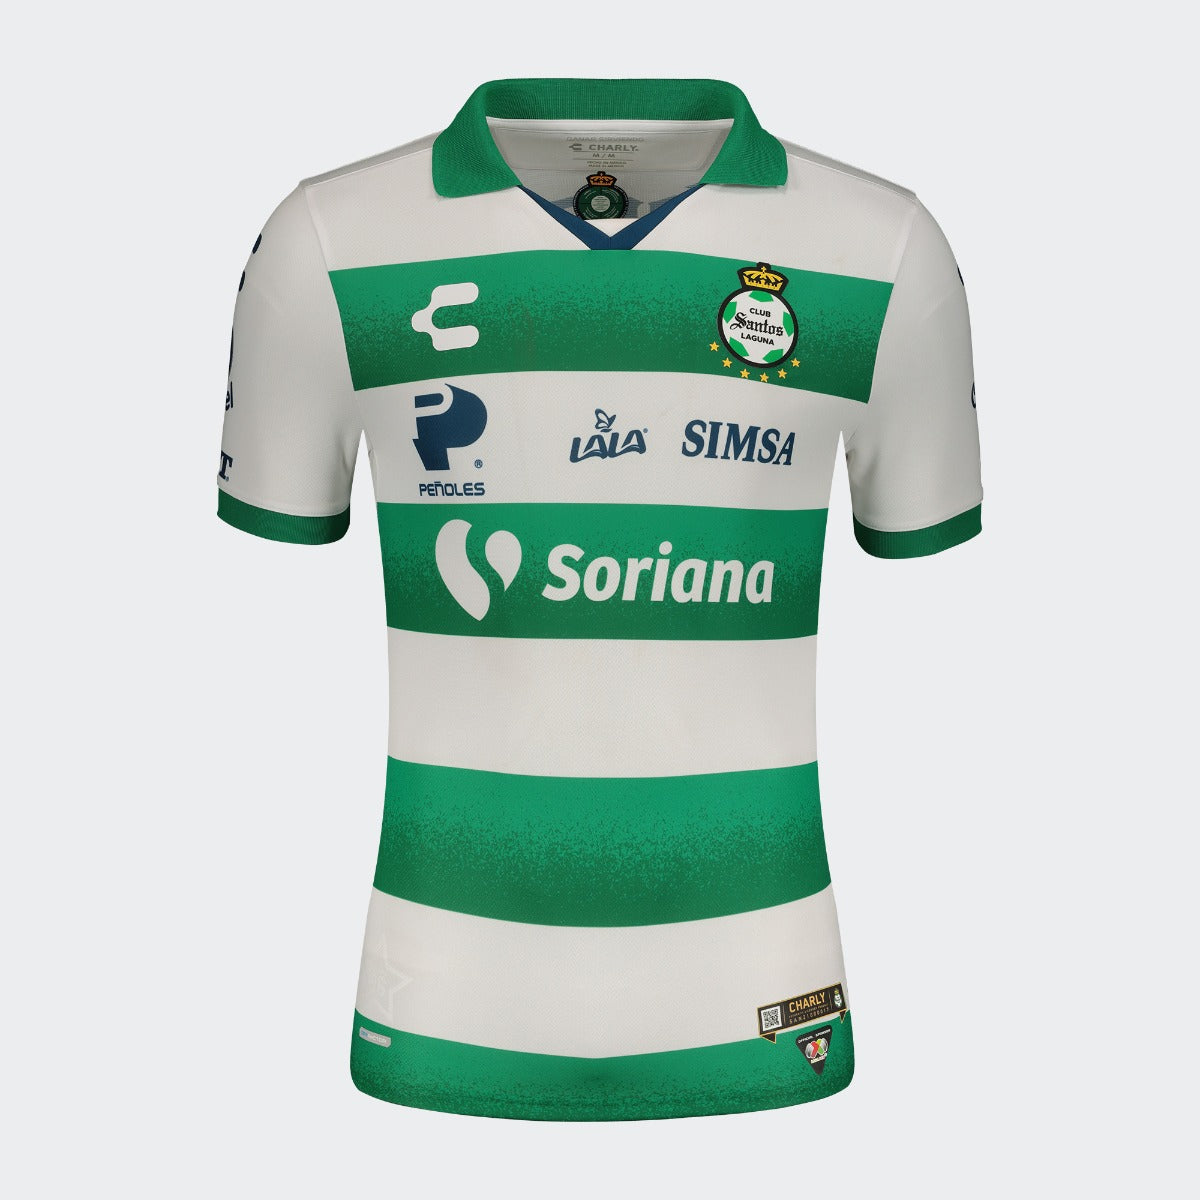 Charly 2021-22 Santos Laguna Home jersey - White-Green (Front)